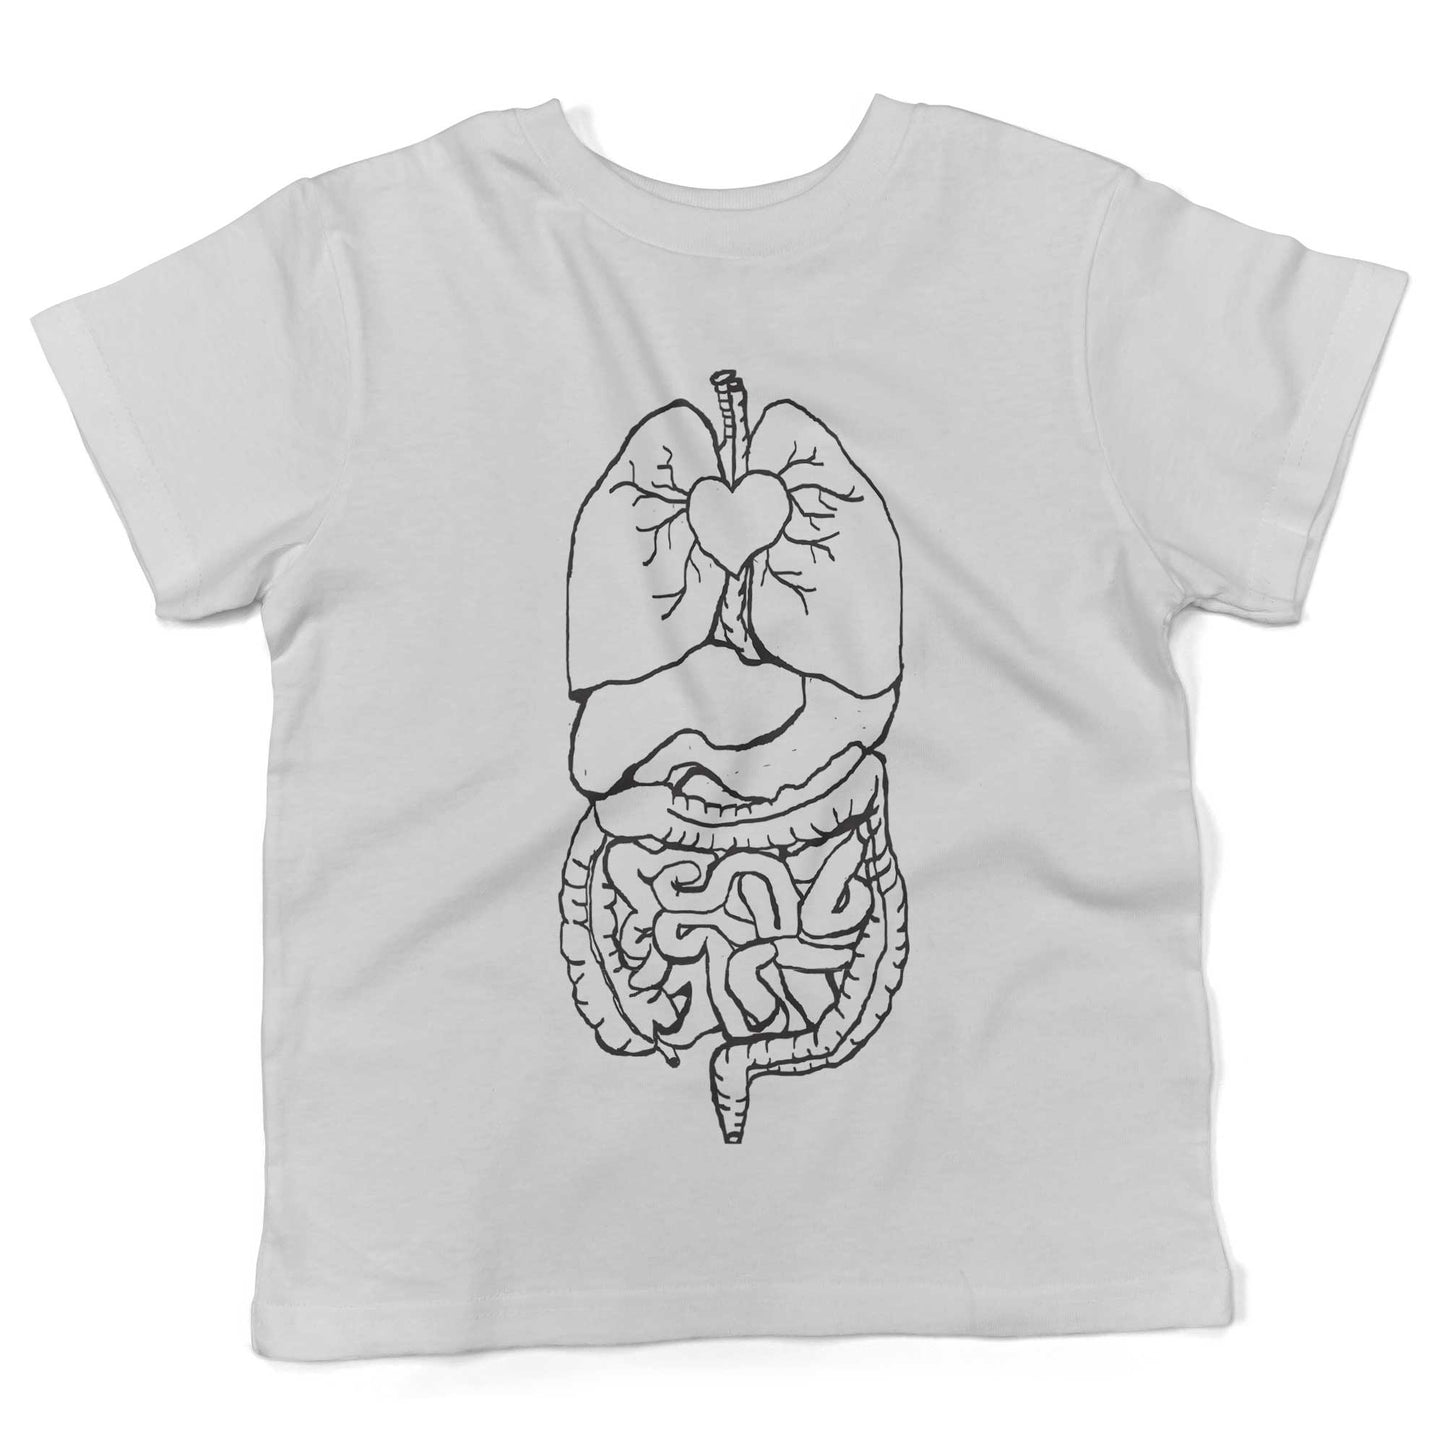 Digestive System Toddler Shirt-White-2T